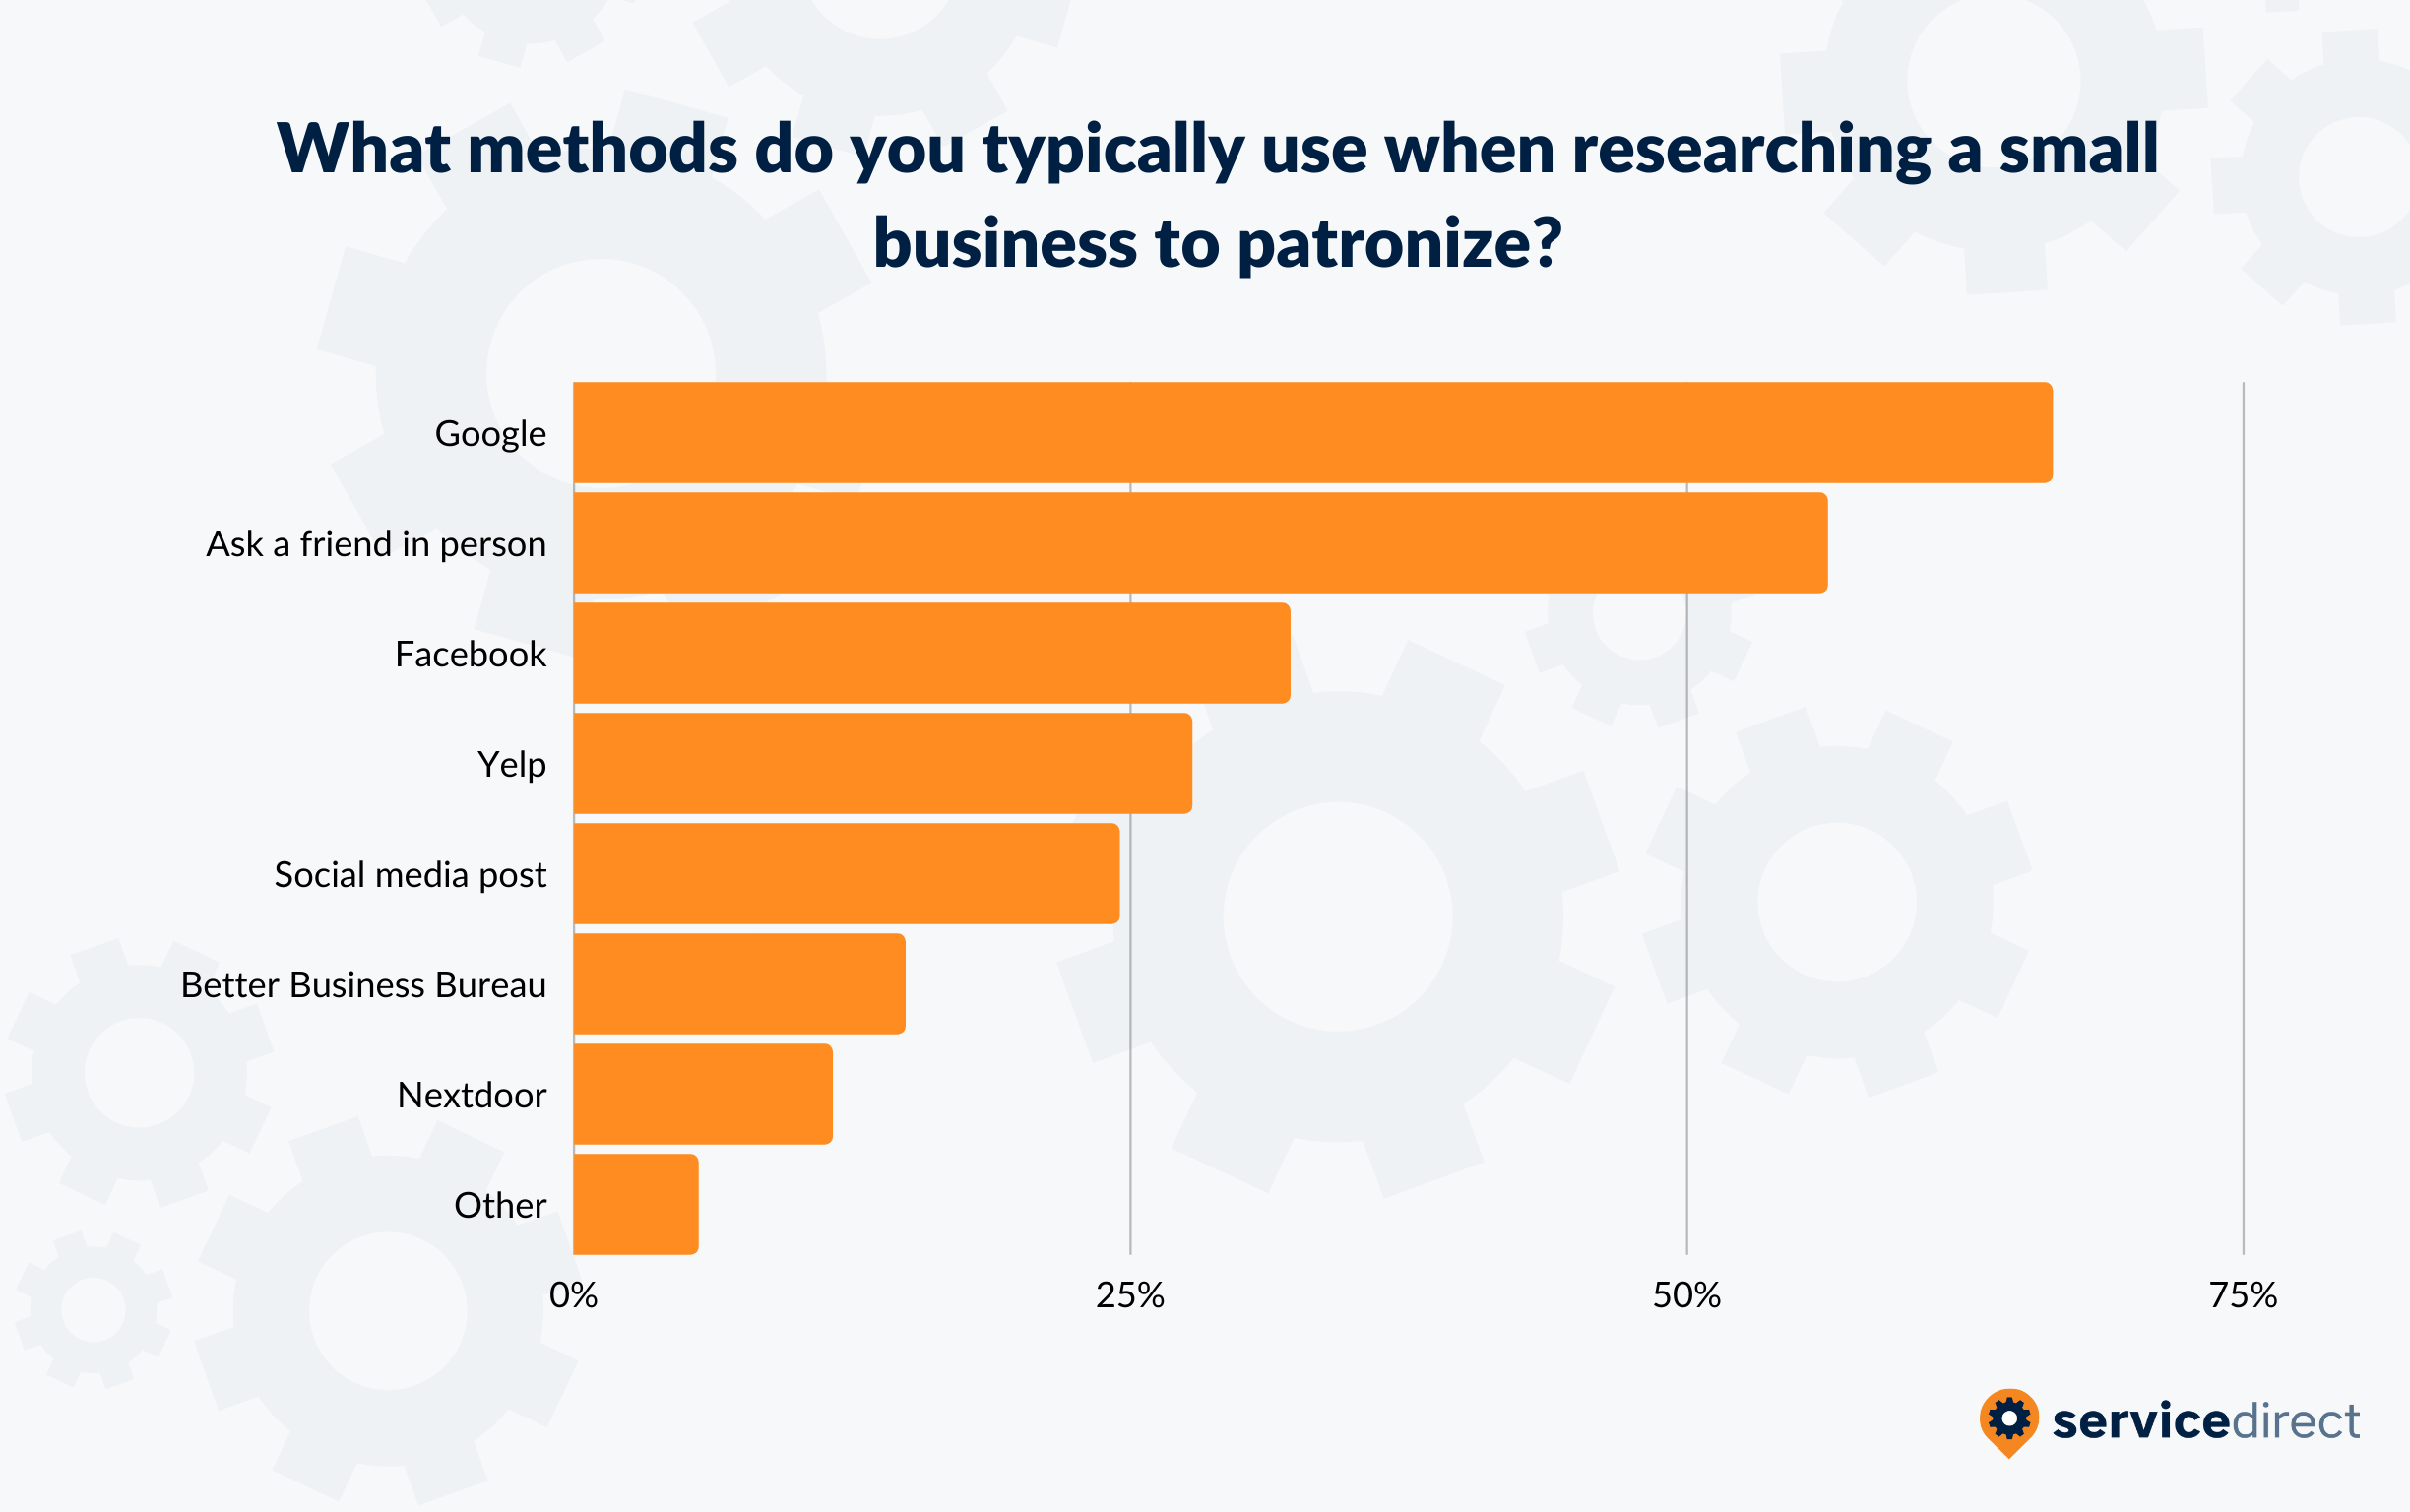 Typical Methods Used When Researching a Small Business to Patronize